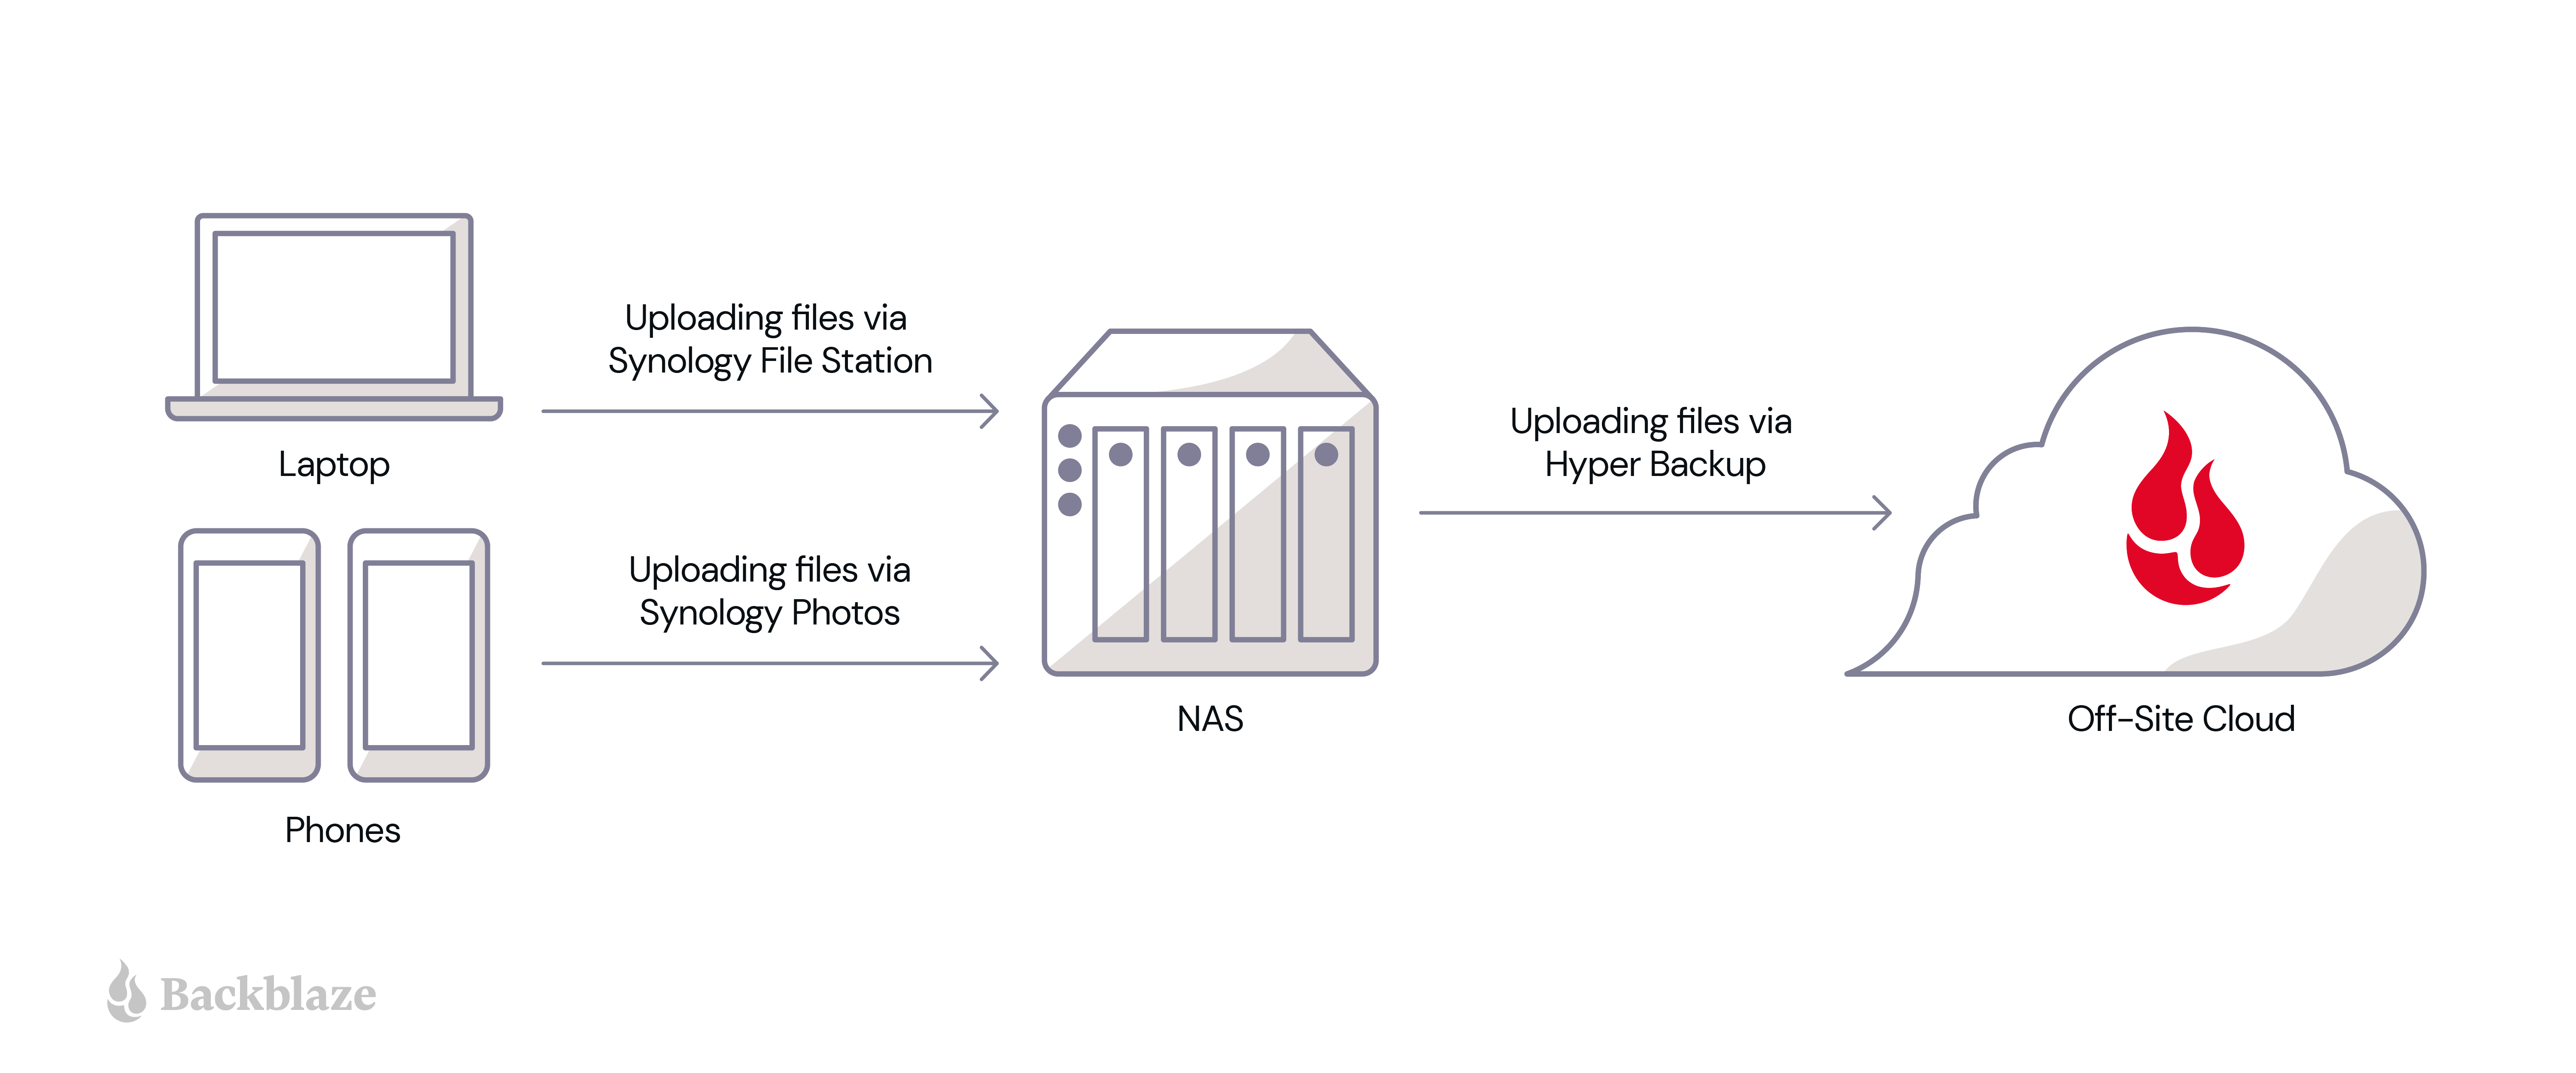 A diagram showing a laptop and two phones. These upload to the central image, a NAS device. The NAS device backs up to a cloud storage provider.